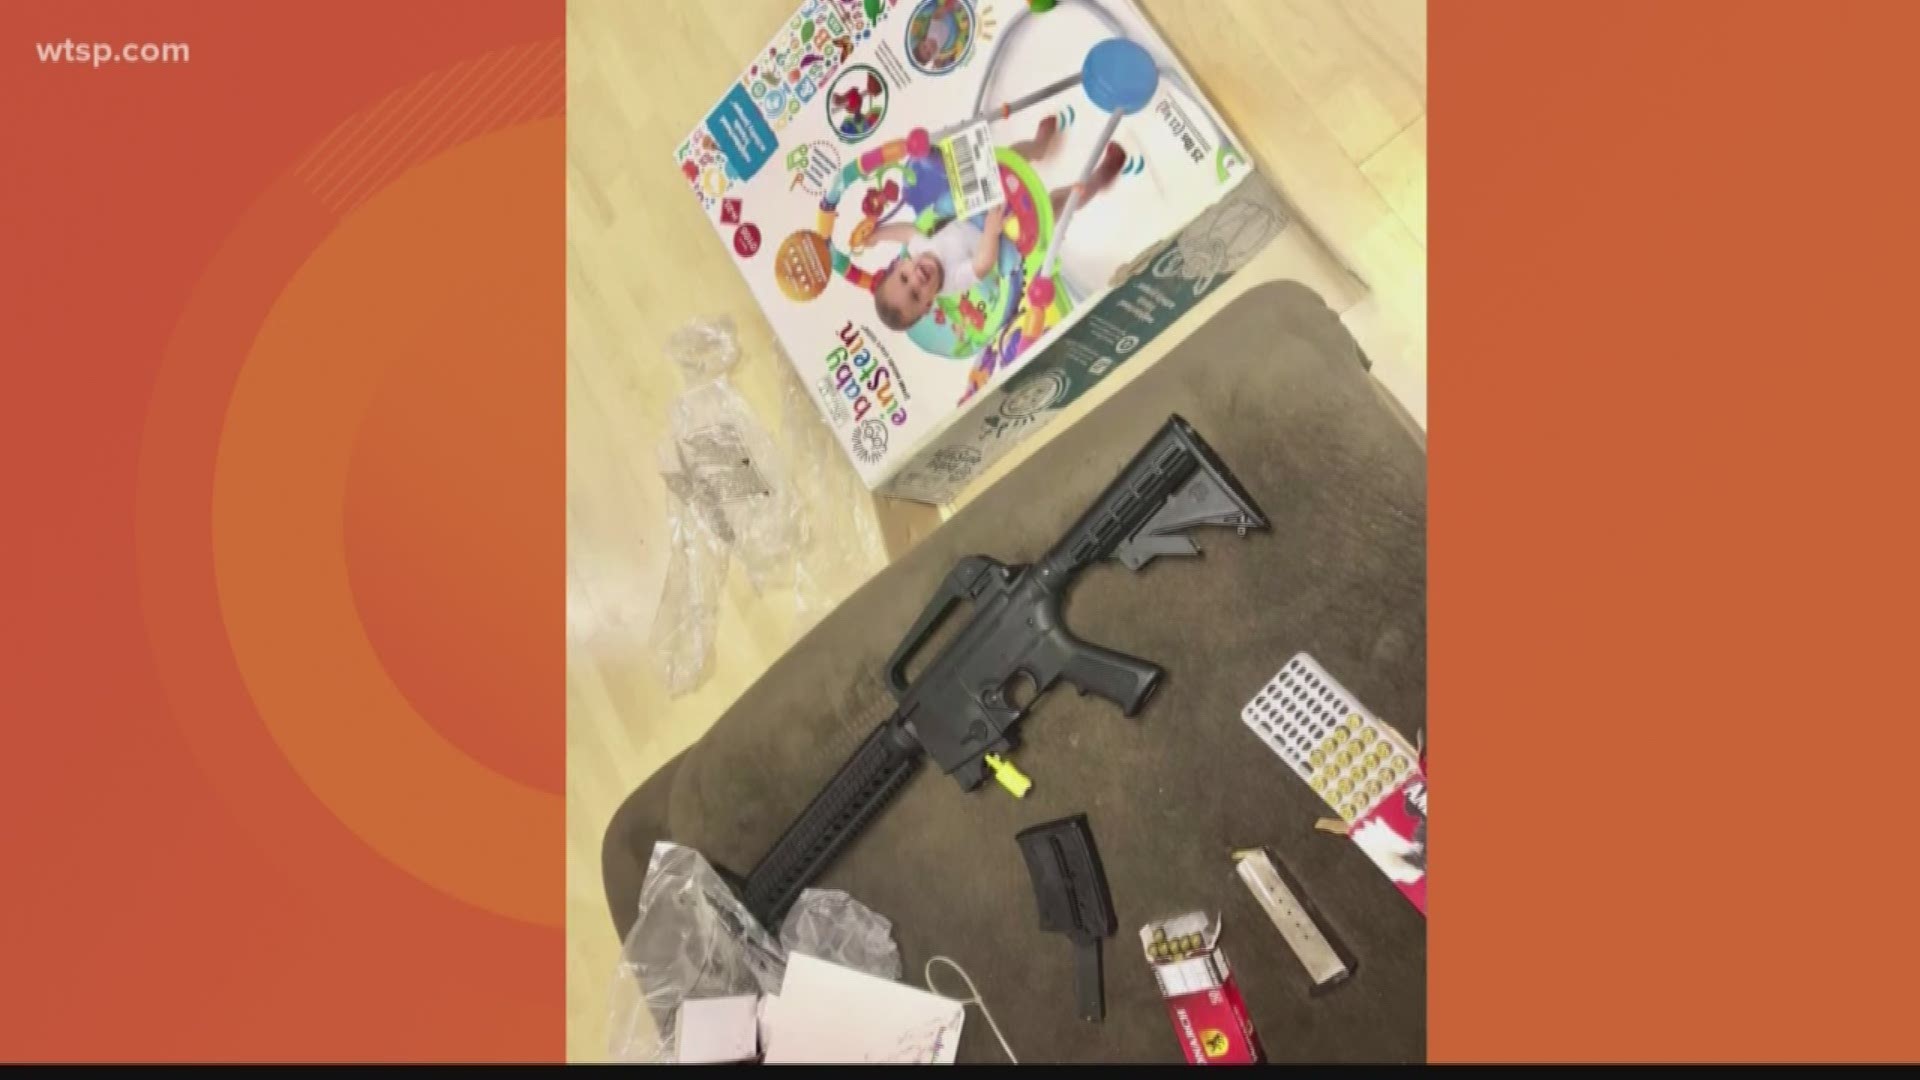 A woman who bought a baby shower gift at a Florida Goodwill store was shocked when the father-to-be opened the box and found a loaded semi-automatic rifle inside.